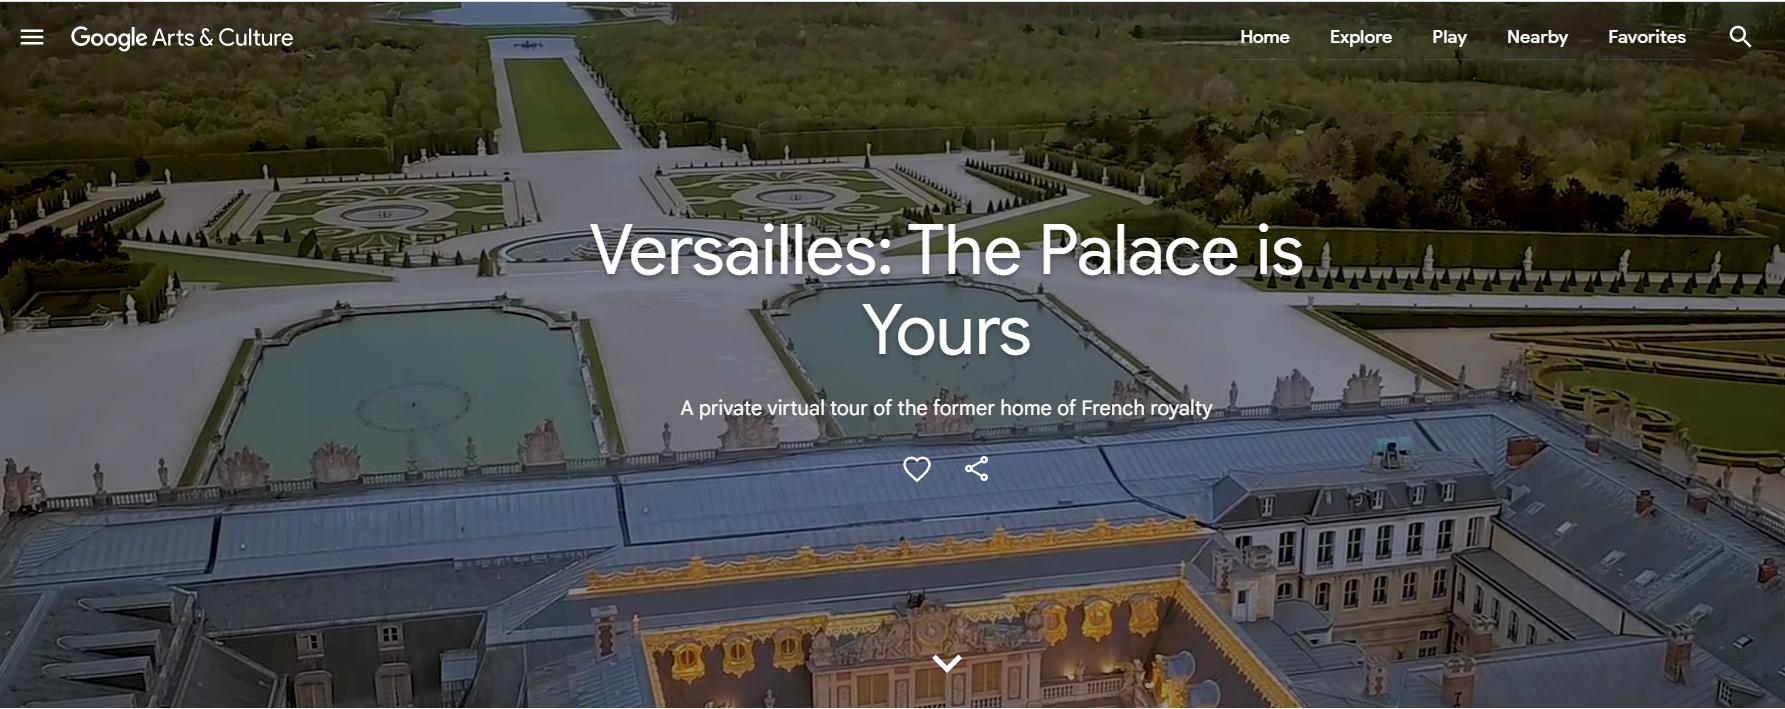 A Screenshot of "Versailles: The Palace is Yours," from Google Arts & Culture